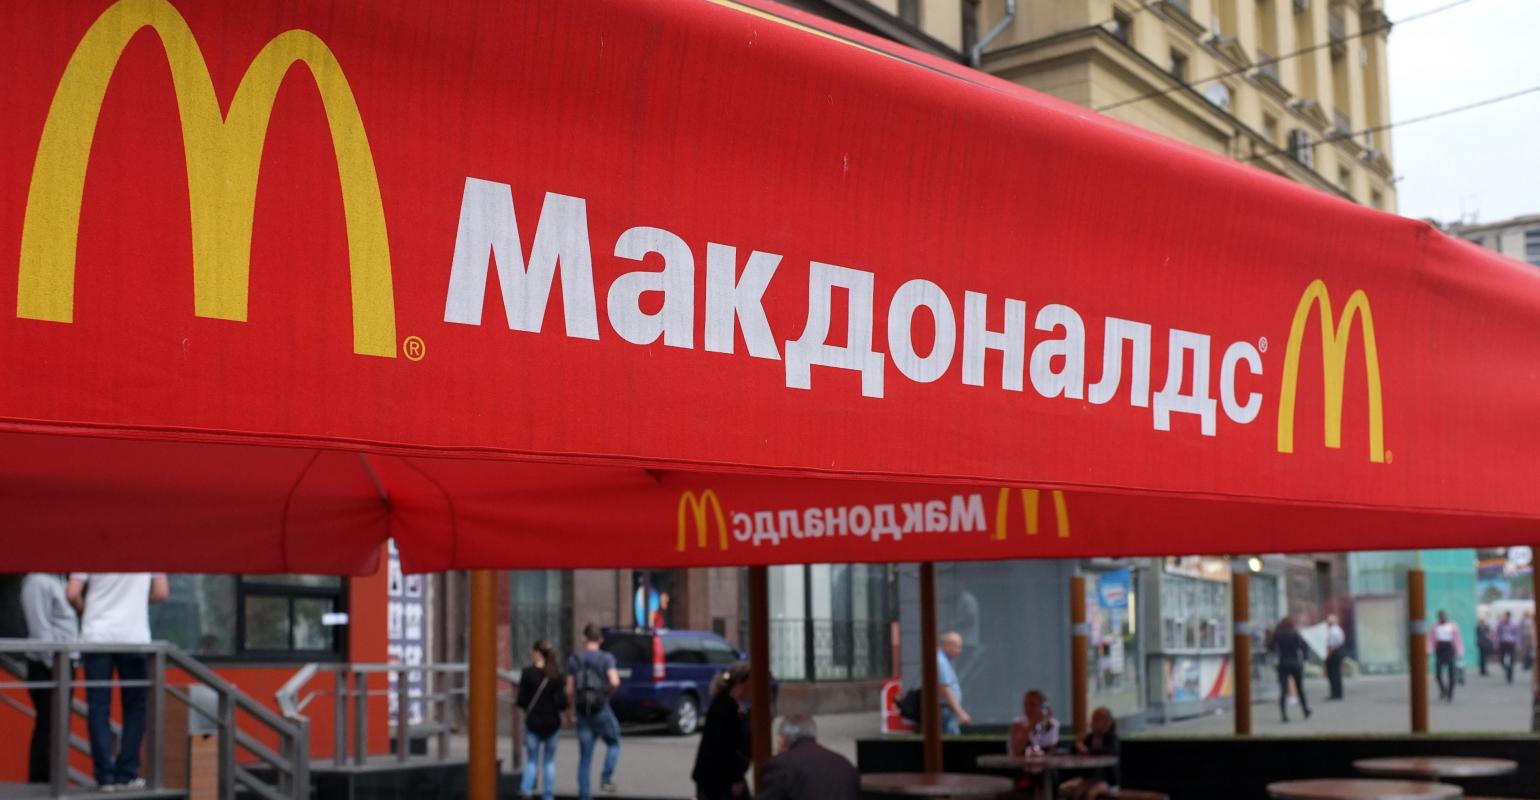 Burger King, Subway, M&S: Western brands in Russian franchise deals